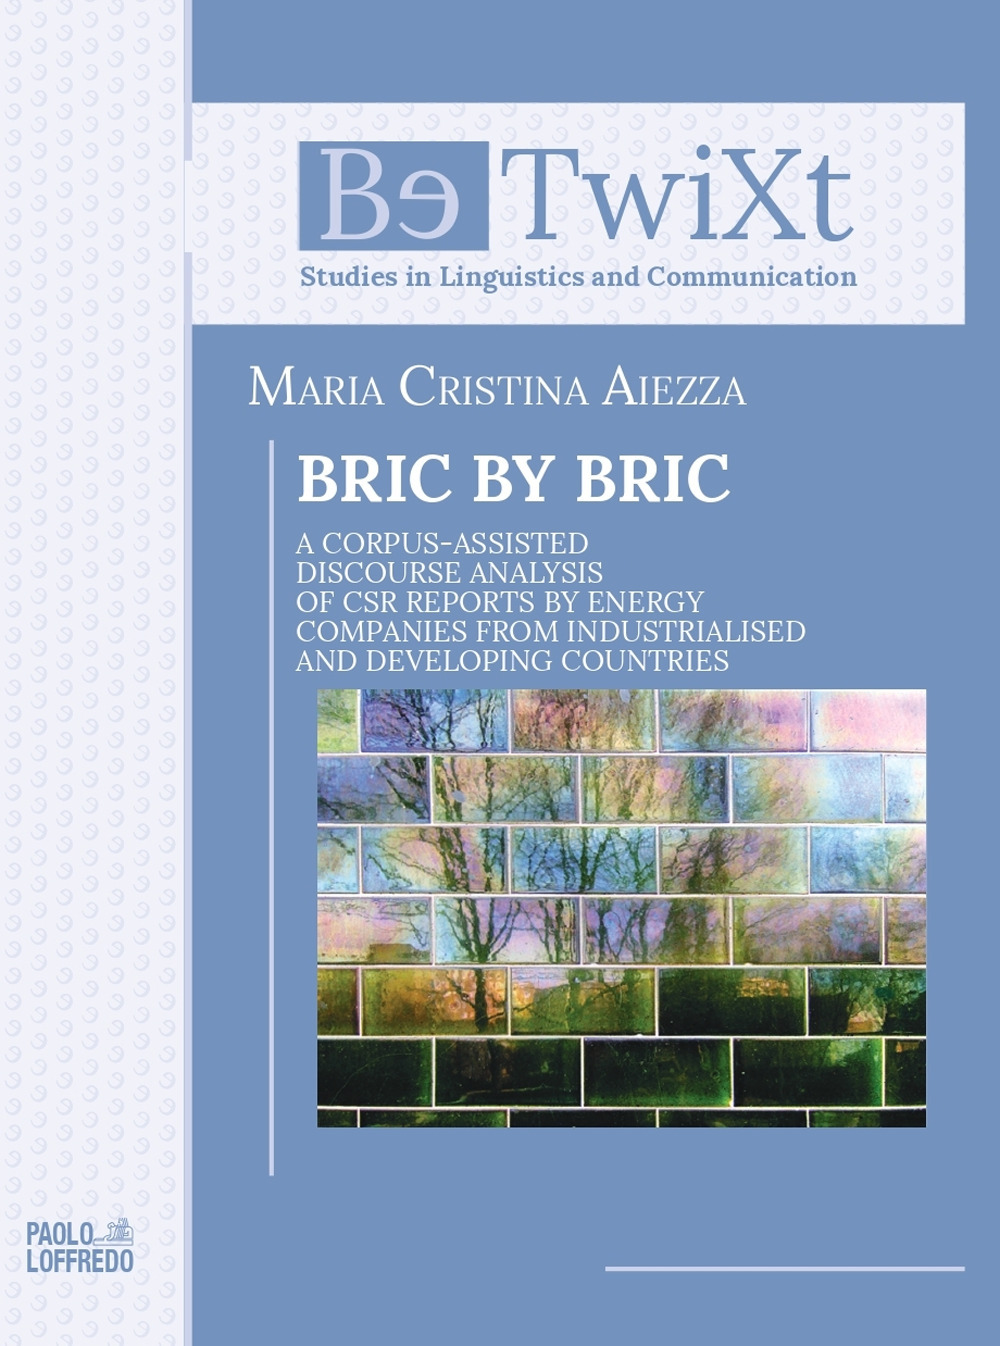 Libri Aiezza Maria Cristina - Bric By Bric. A Corpus-Assisted Discourse Analysis Of CSR Reports By Energy Companies From Industrialised And Developing Count NUOVO SIGILLATO SUBITO DISPONIBILE